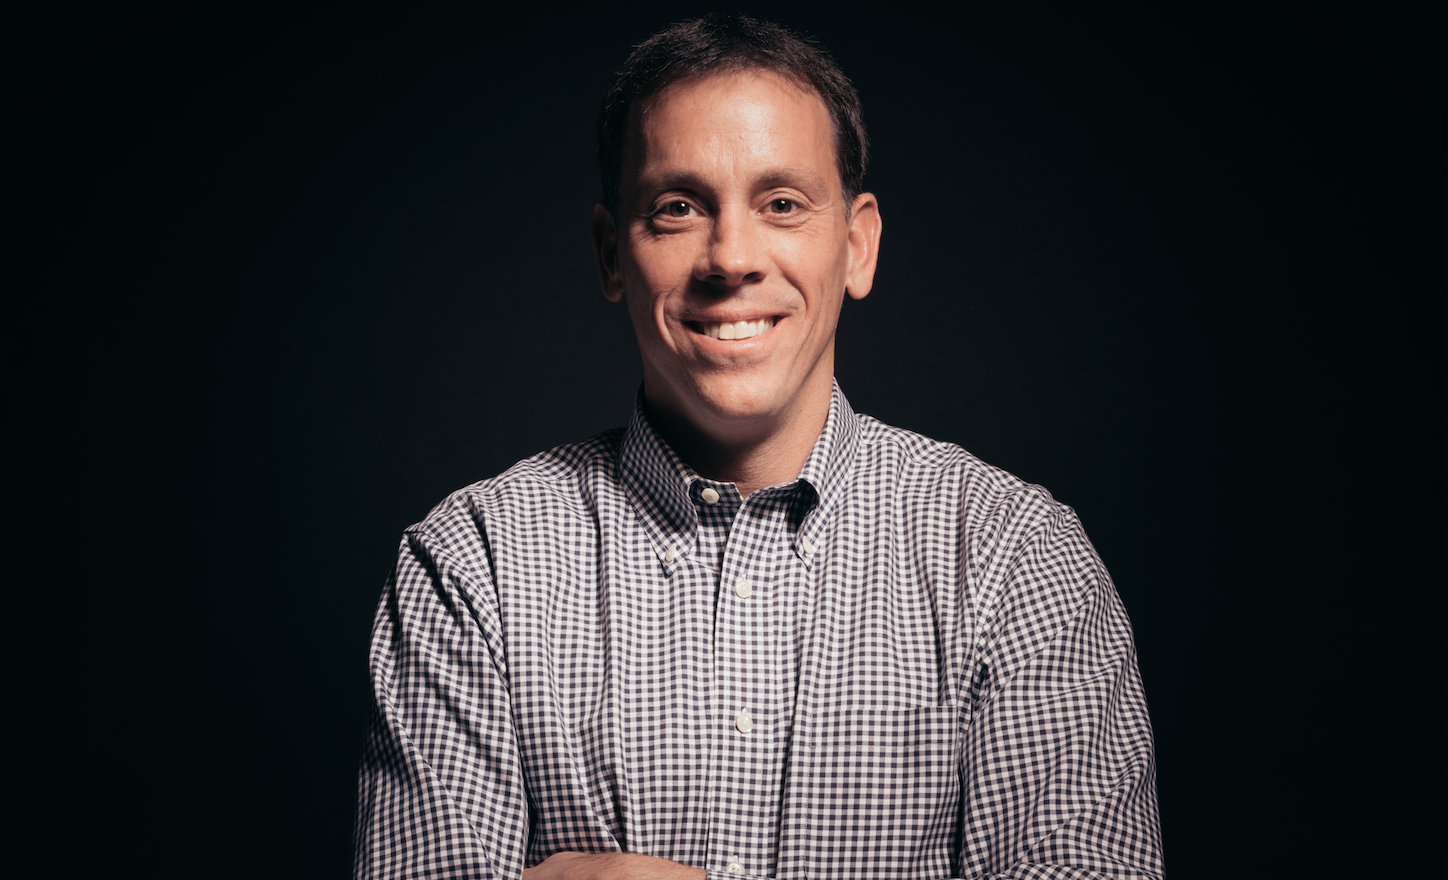 Podcast 17: Axios CEO Jim VandeHei on how to be a journalist entrepreneur